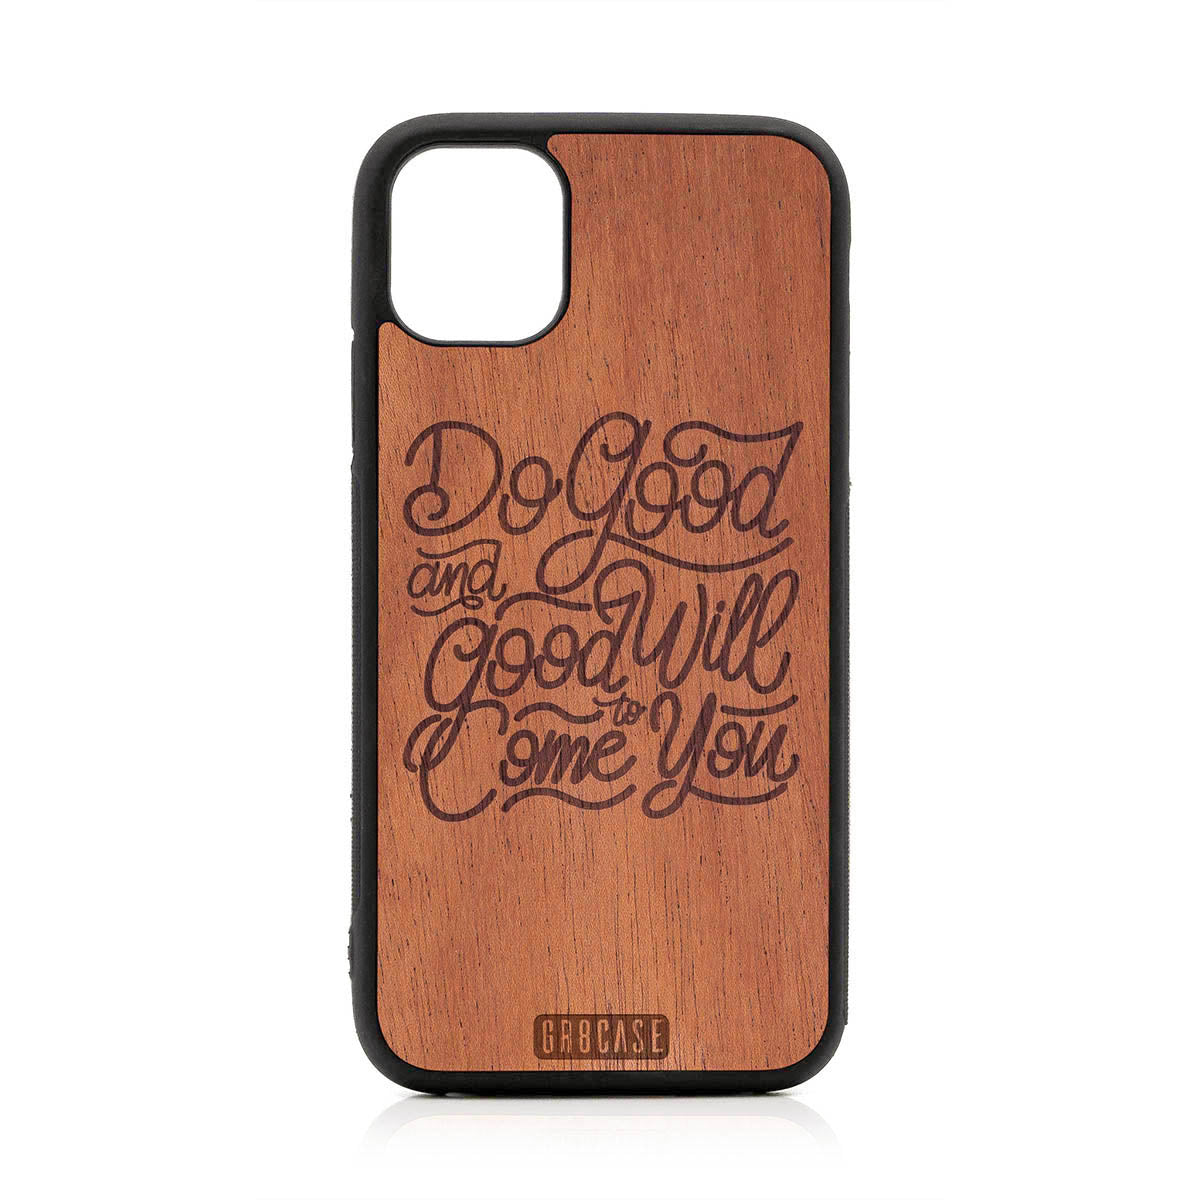 Do Good And Good Will Come To You Design Wood Case For iPhone 11 by GR8CASE